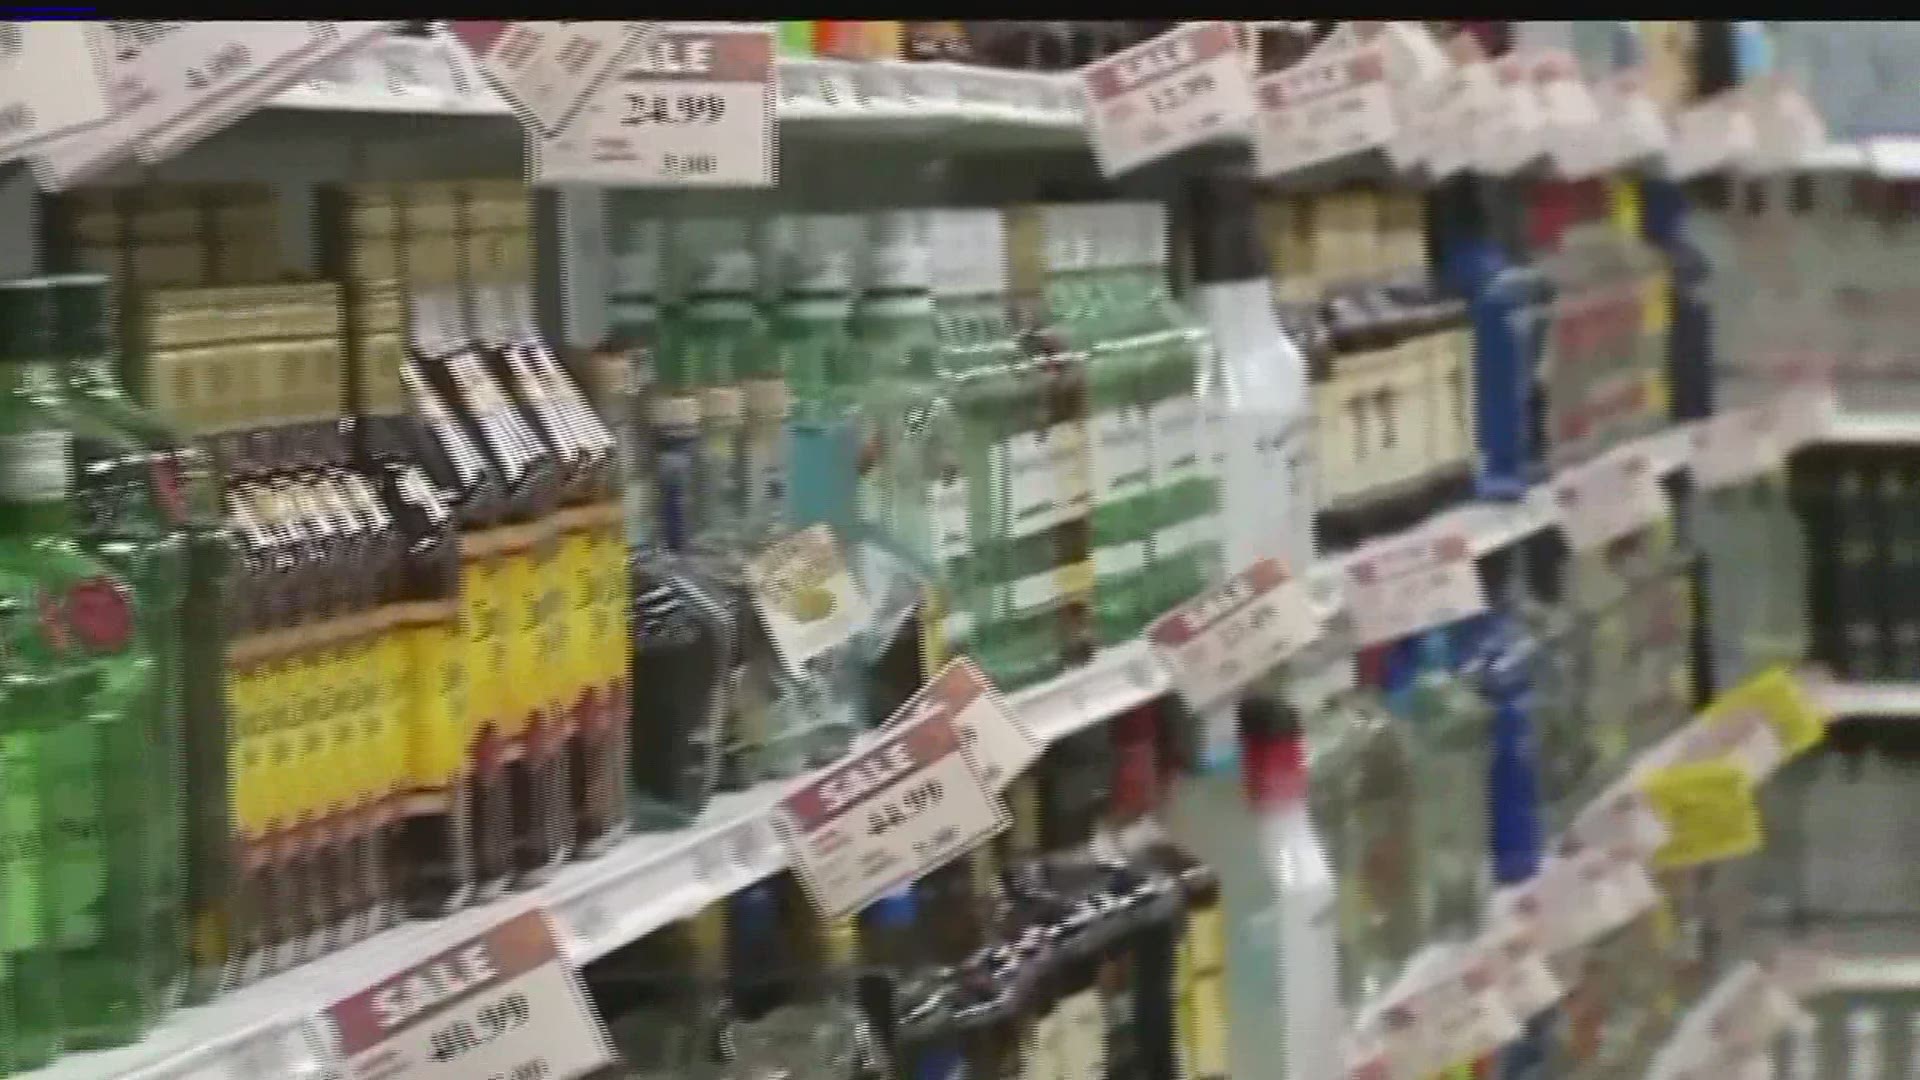 Of the 600 state-run liquor stores, only 176 will offer curbside pickup beginning April 20.